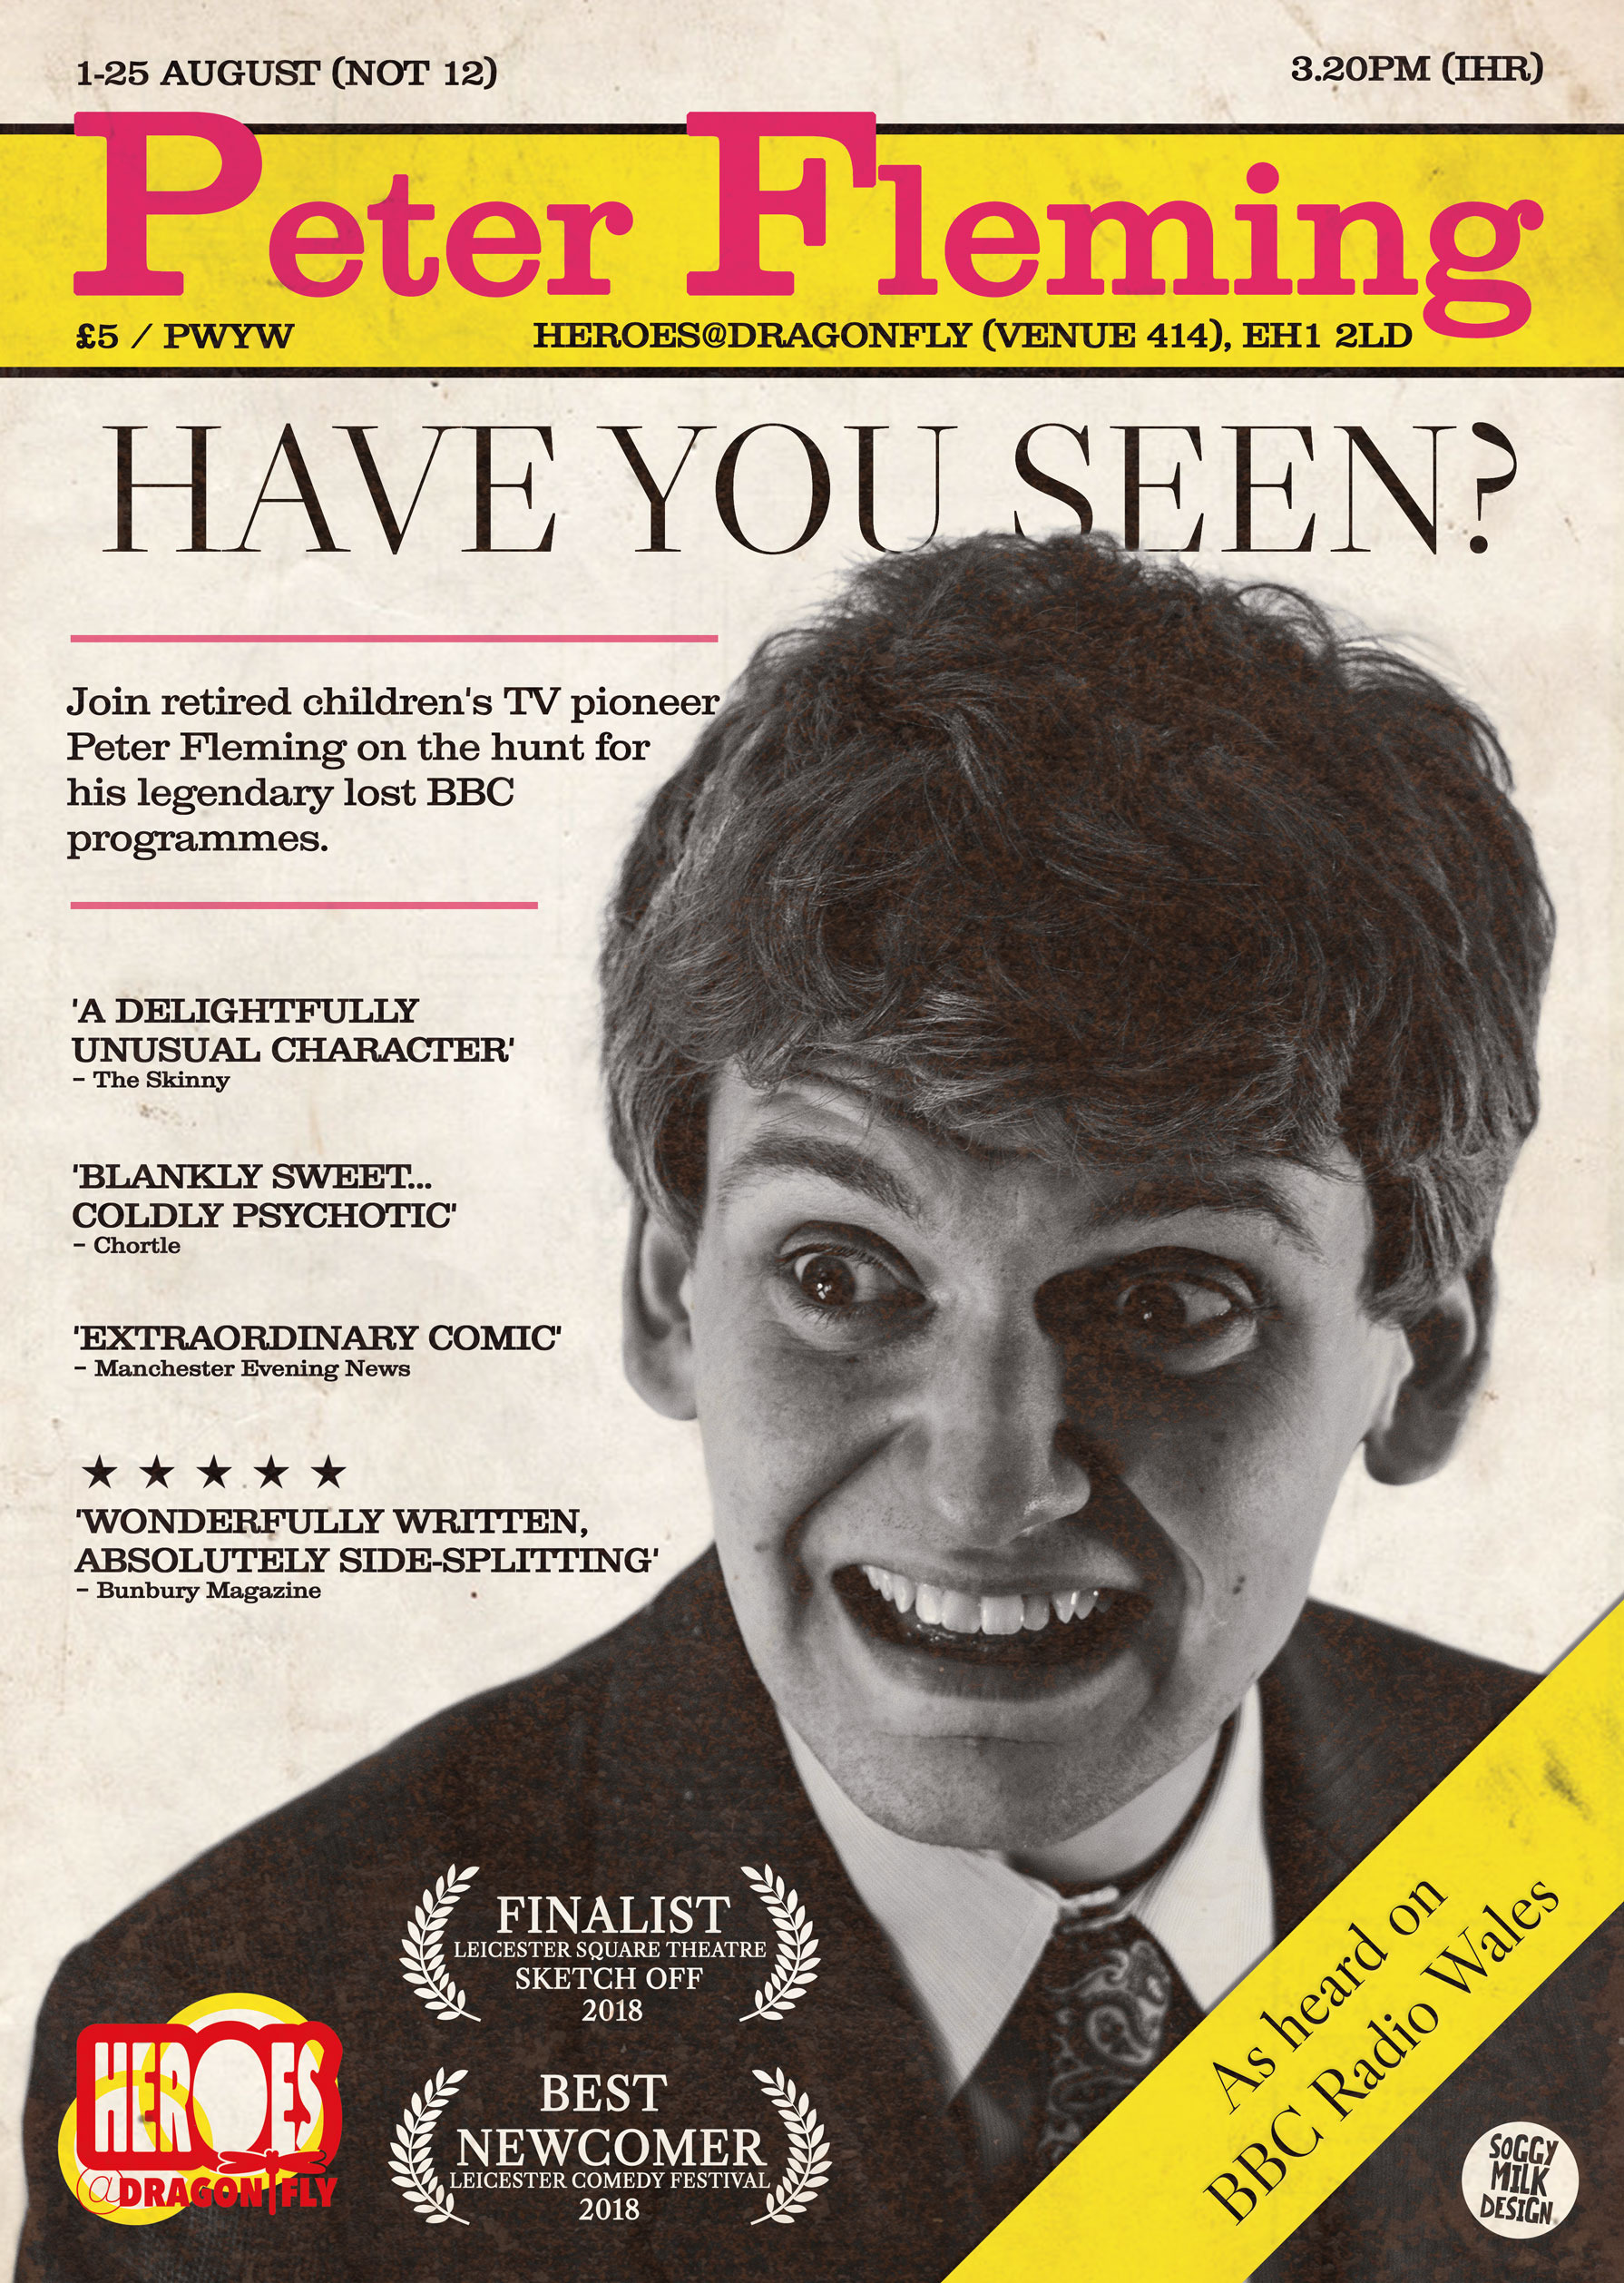 The poster for Peter Fleming: Have You Seen?